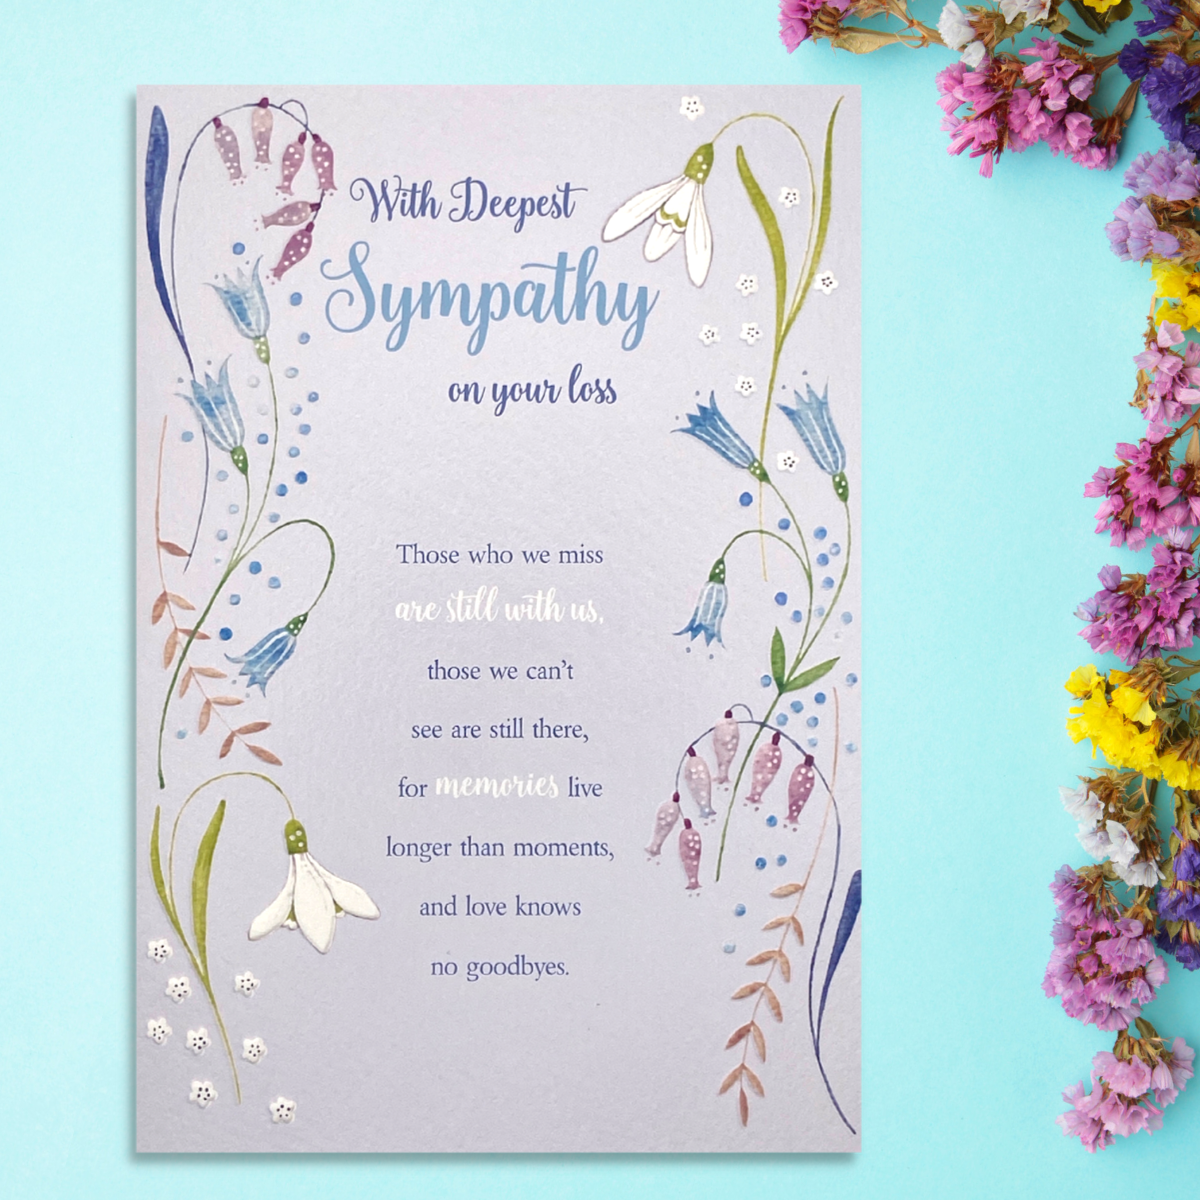 Grey card with floral border and verse